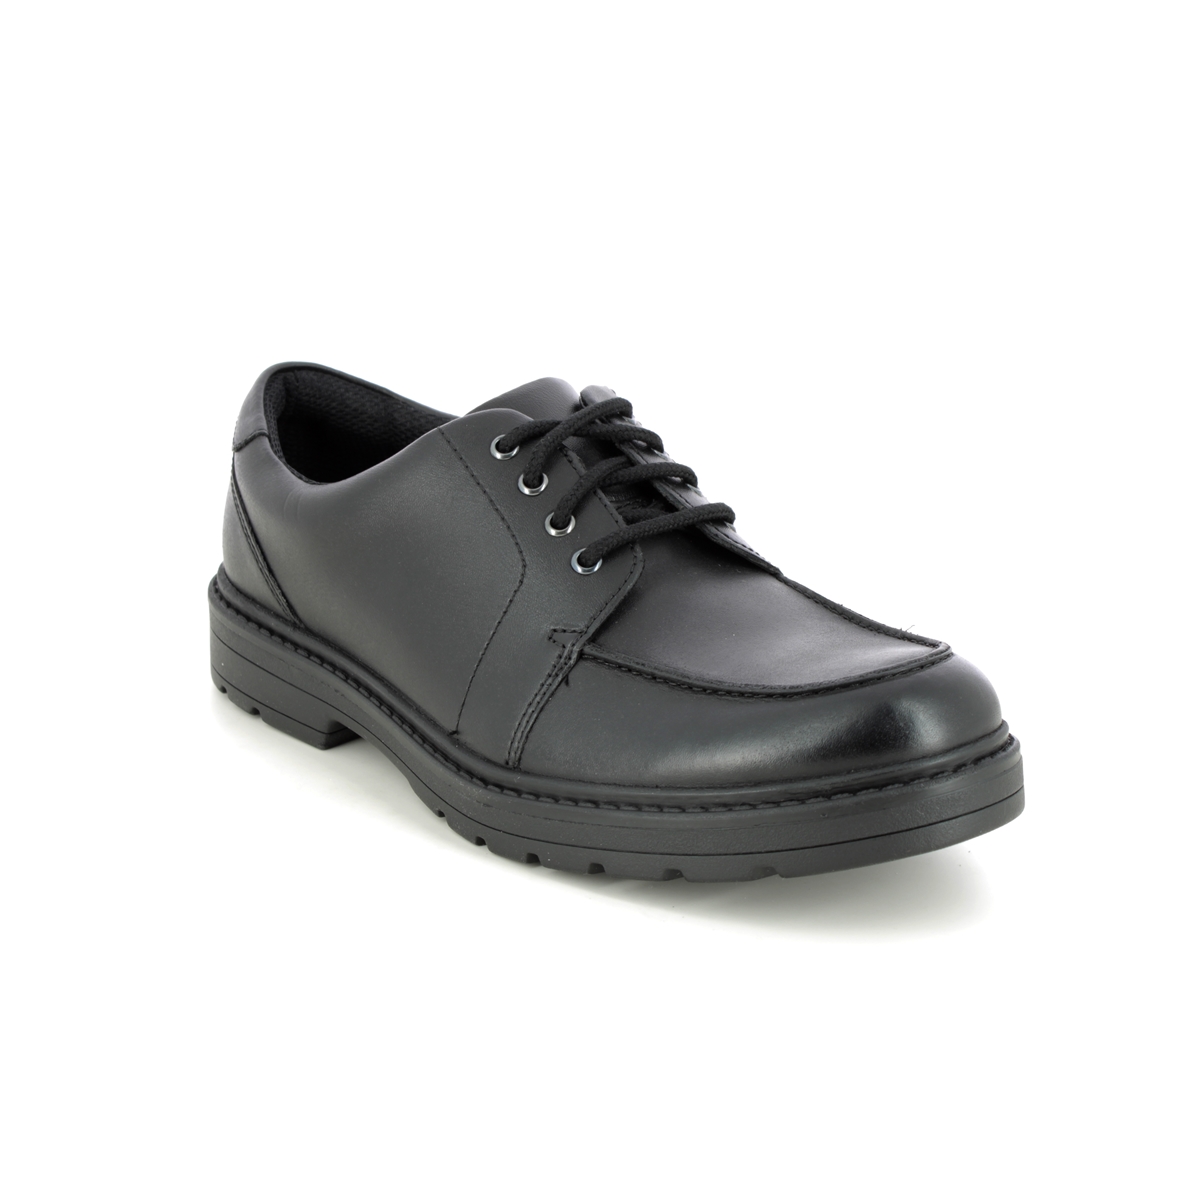 Clarks Loxham Pace Y Black Kids Boys Shoes 515926F In Size 3 In Plain Black F Width Fitting Regular Fit For School For kids